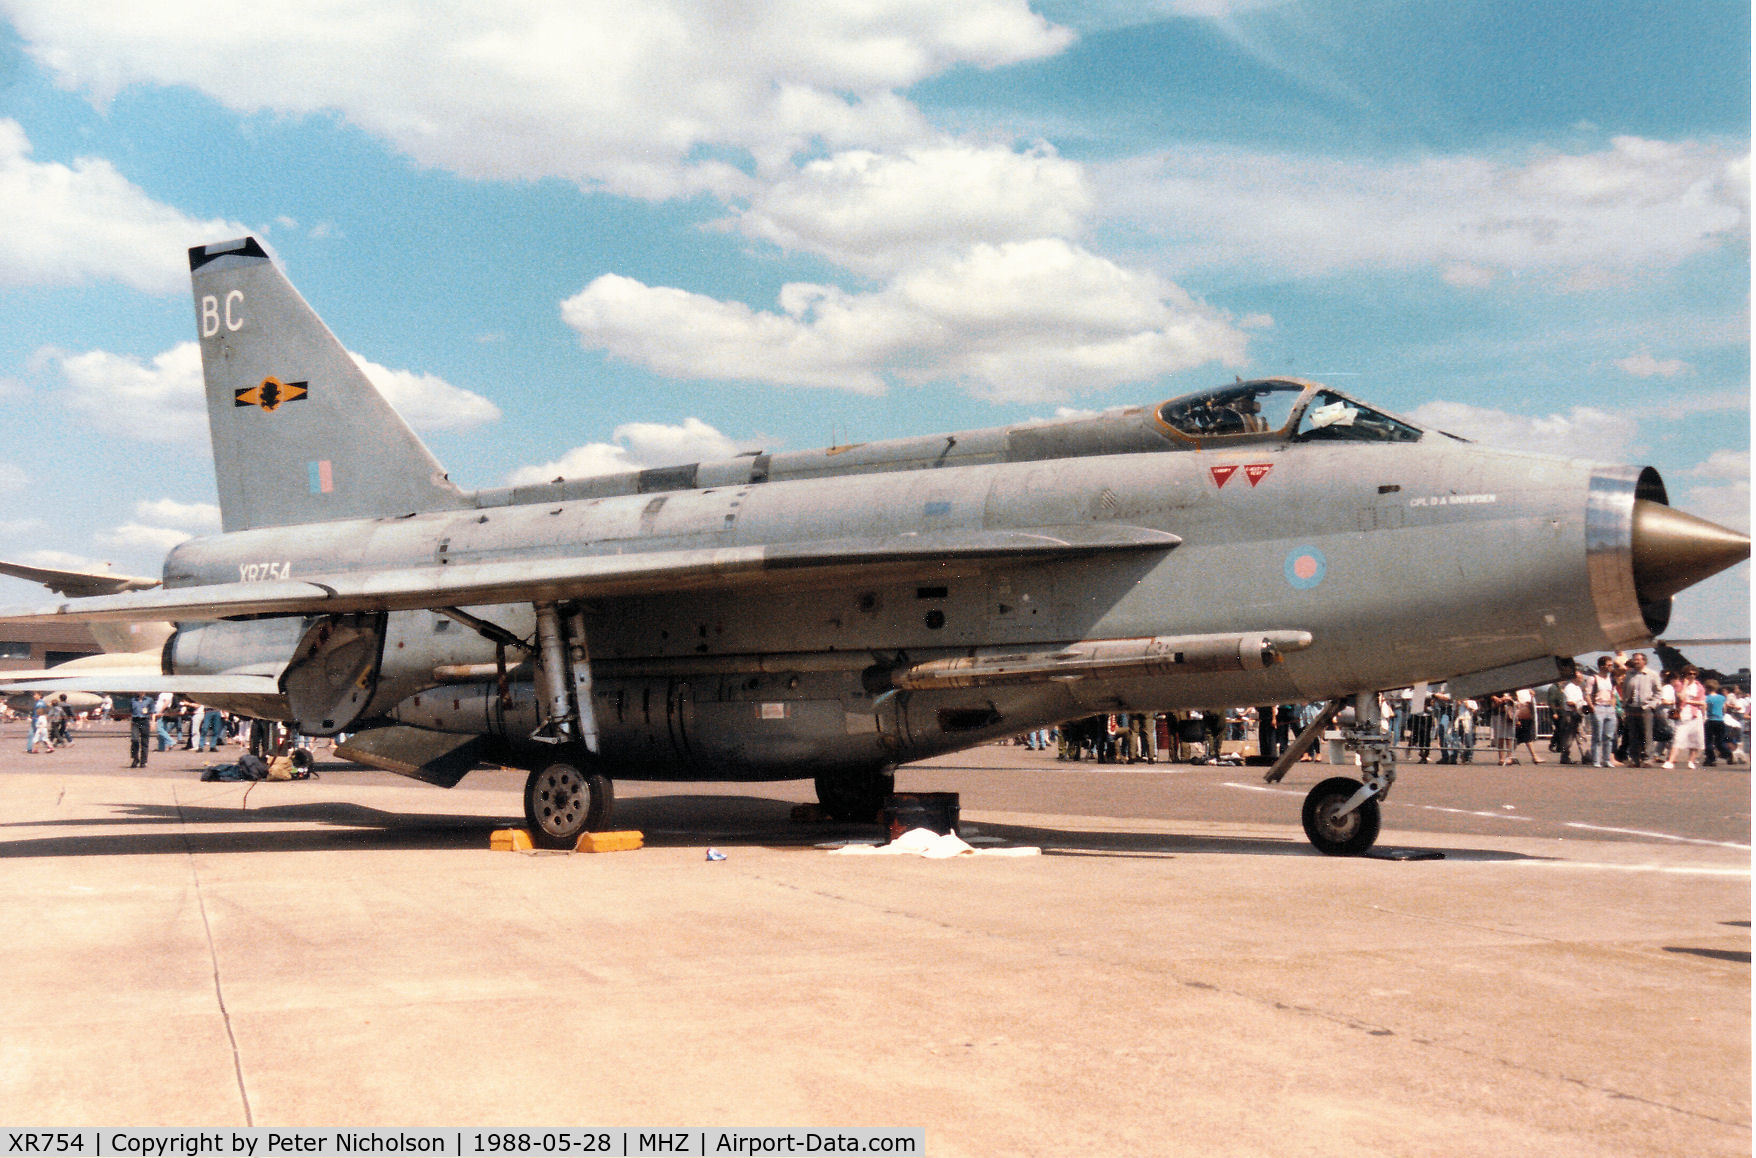 XR754, 1965 English Electric Lightning F.6 C/N 95219, Another view of the 11 Squadron Lightning F.6 on display at the 1988 RAF Mildenhall Air Fete.